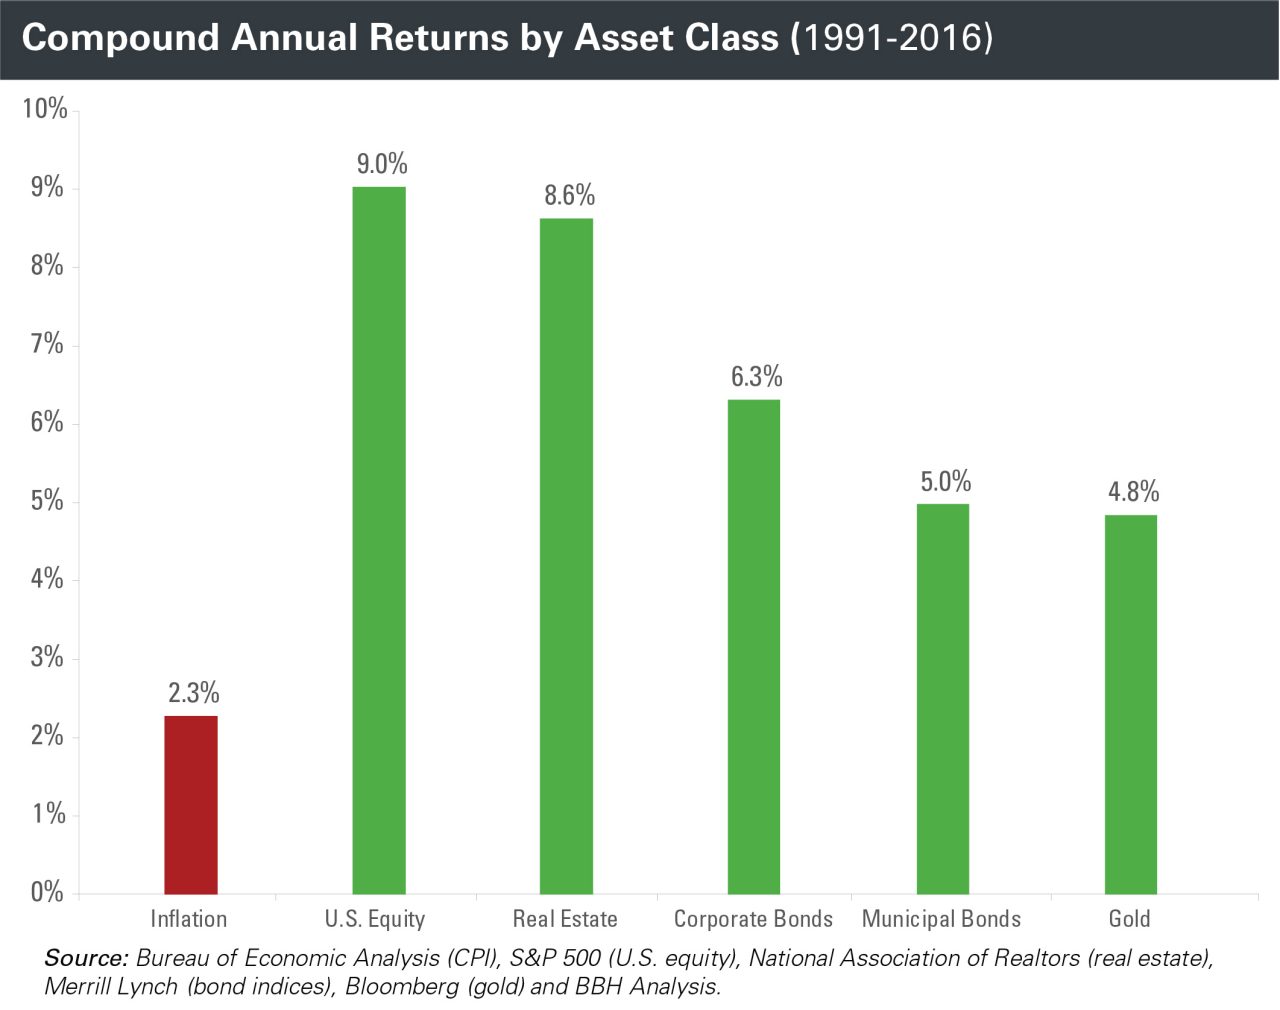 Compound Annual Returns by Asset Class Bar from 1991 to 2016 showing inflation, U.S. Equity, real estate, corporate bonds, municipal bonds, and gold